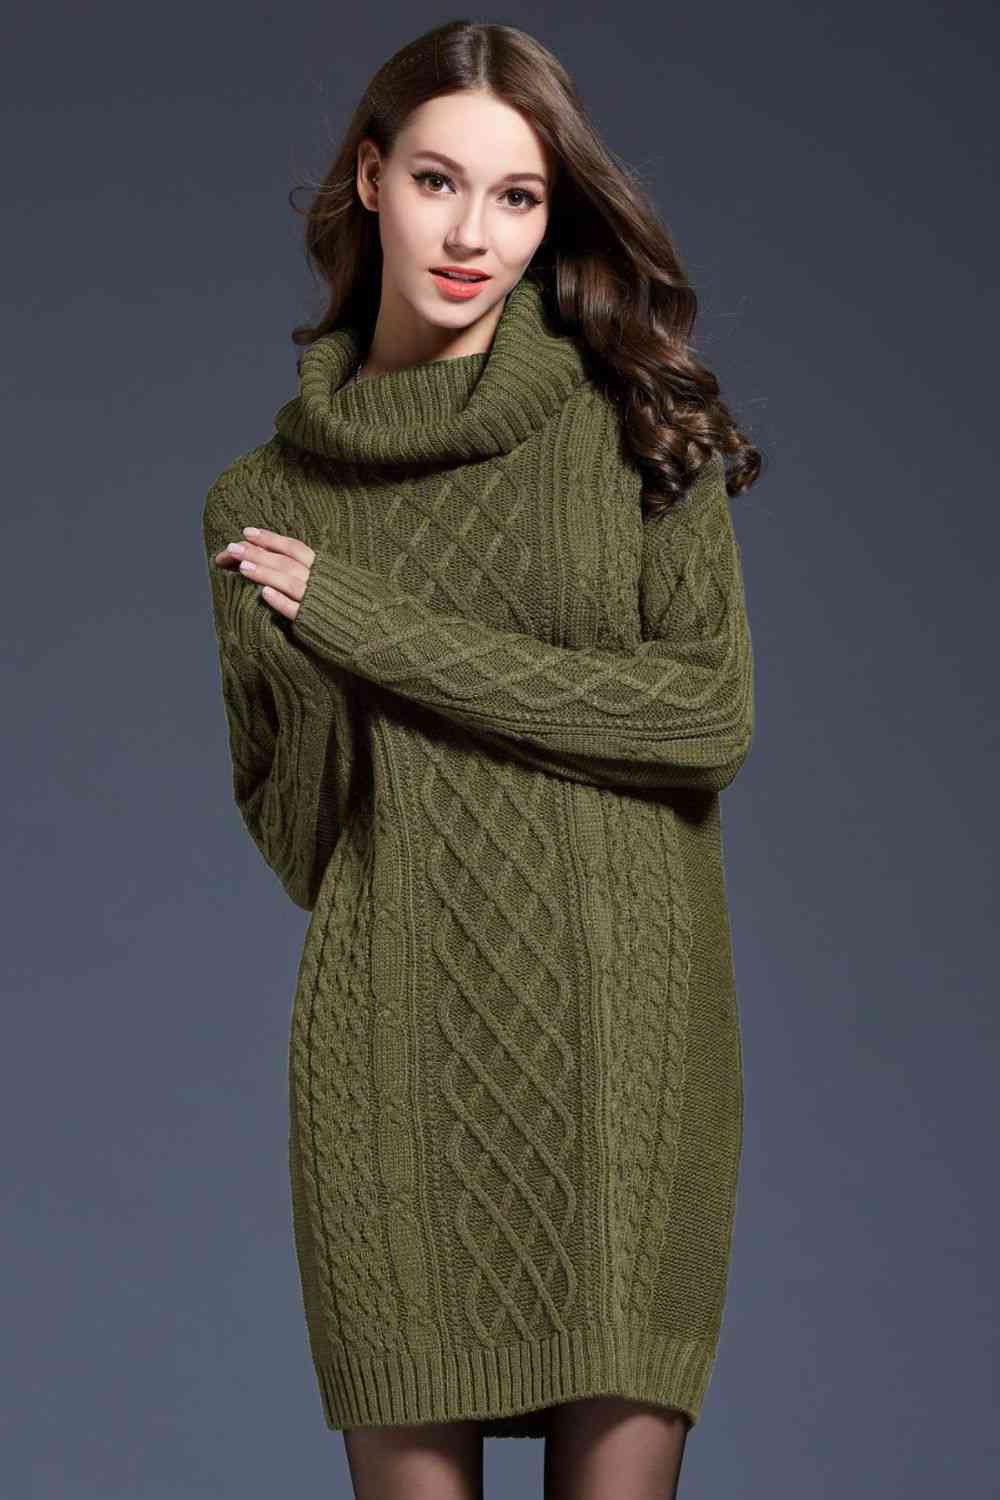 Woven Right Full Size Mixed Knit Cowl Neck Dropped Shoulder Sweater Dress Green